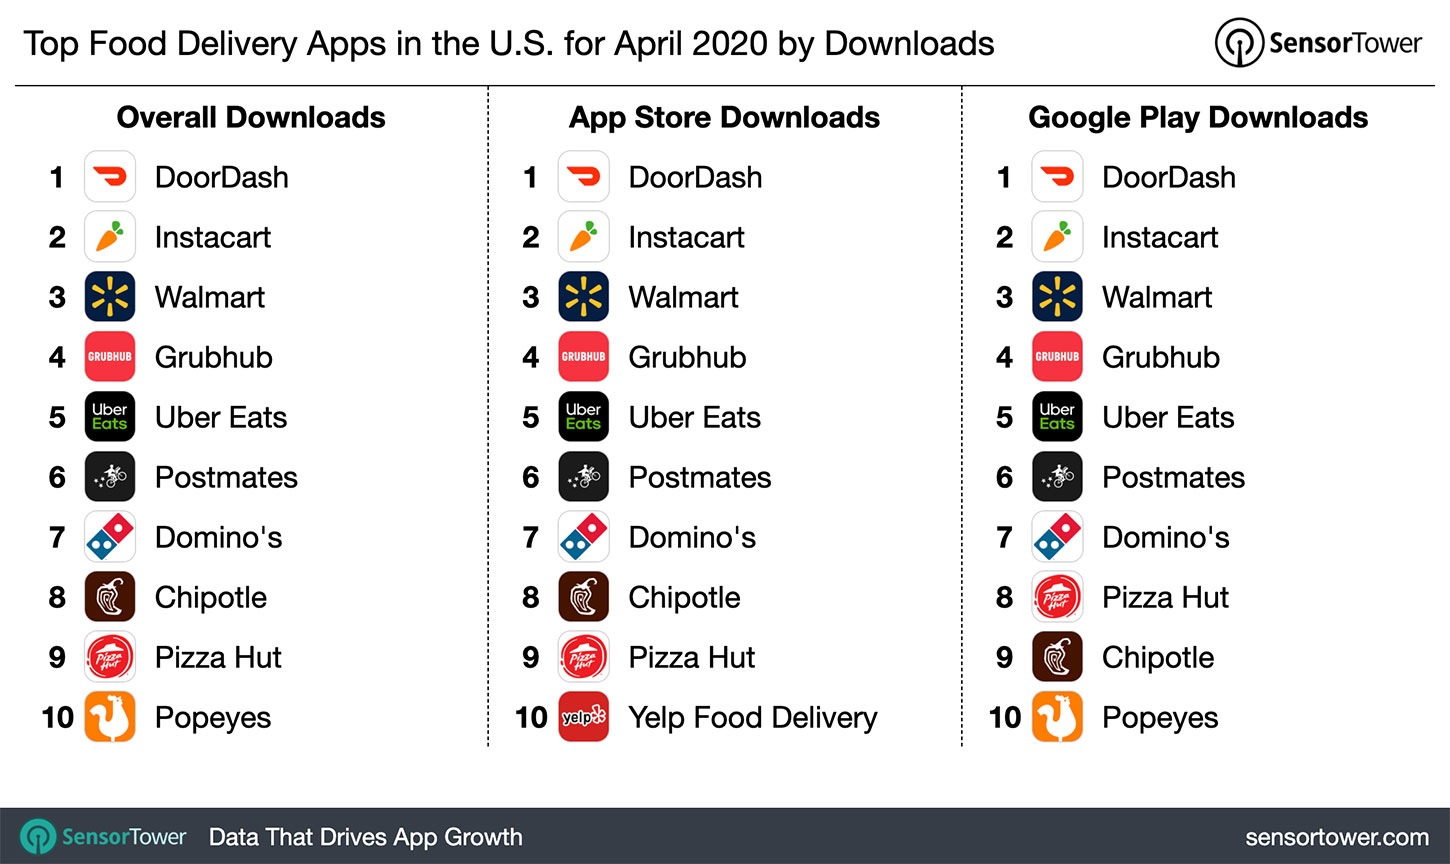 Top Food Delivery Apps in the U.S. for April 2020 by Downloads